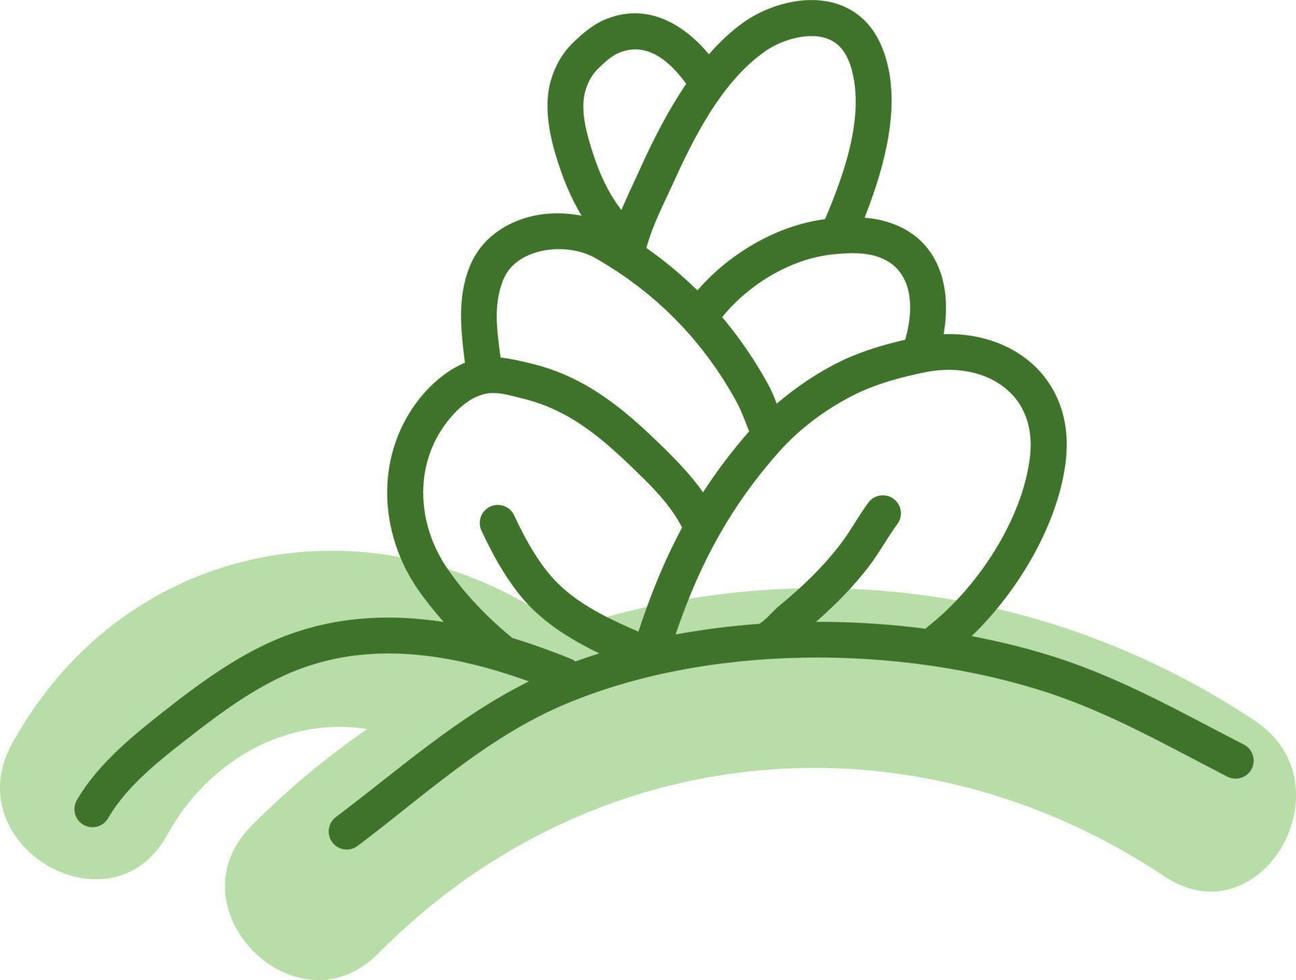 Bunny ears cactus, illustration, vector on a white background.